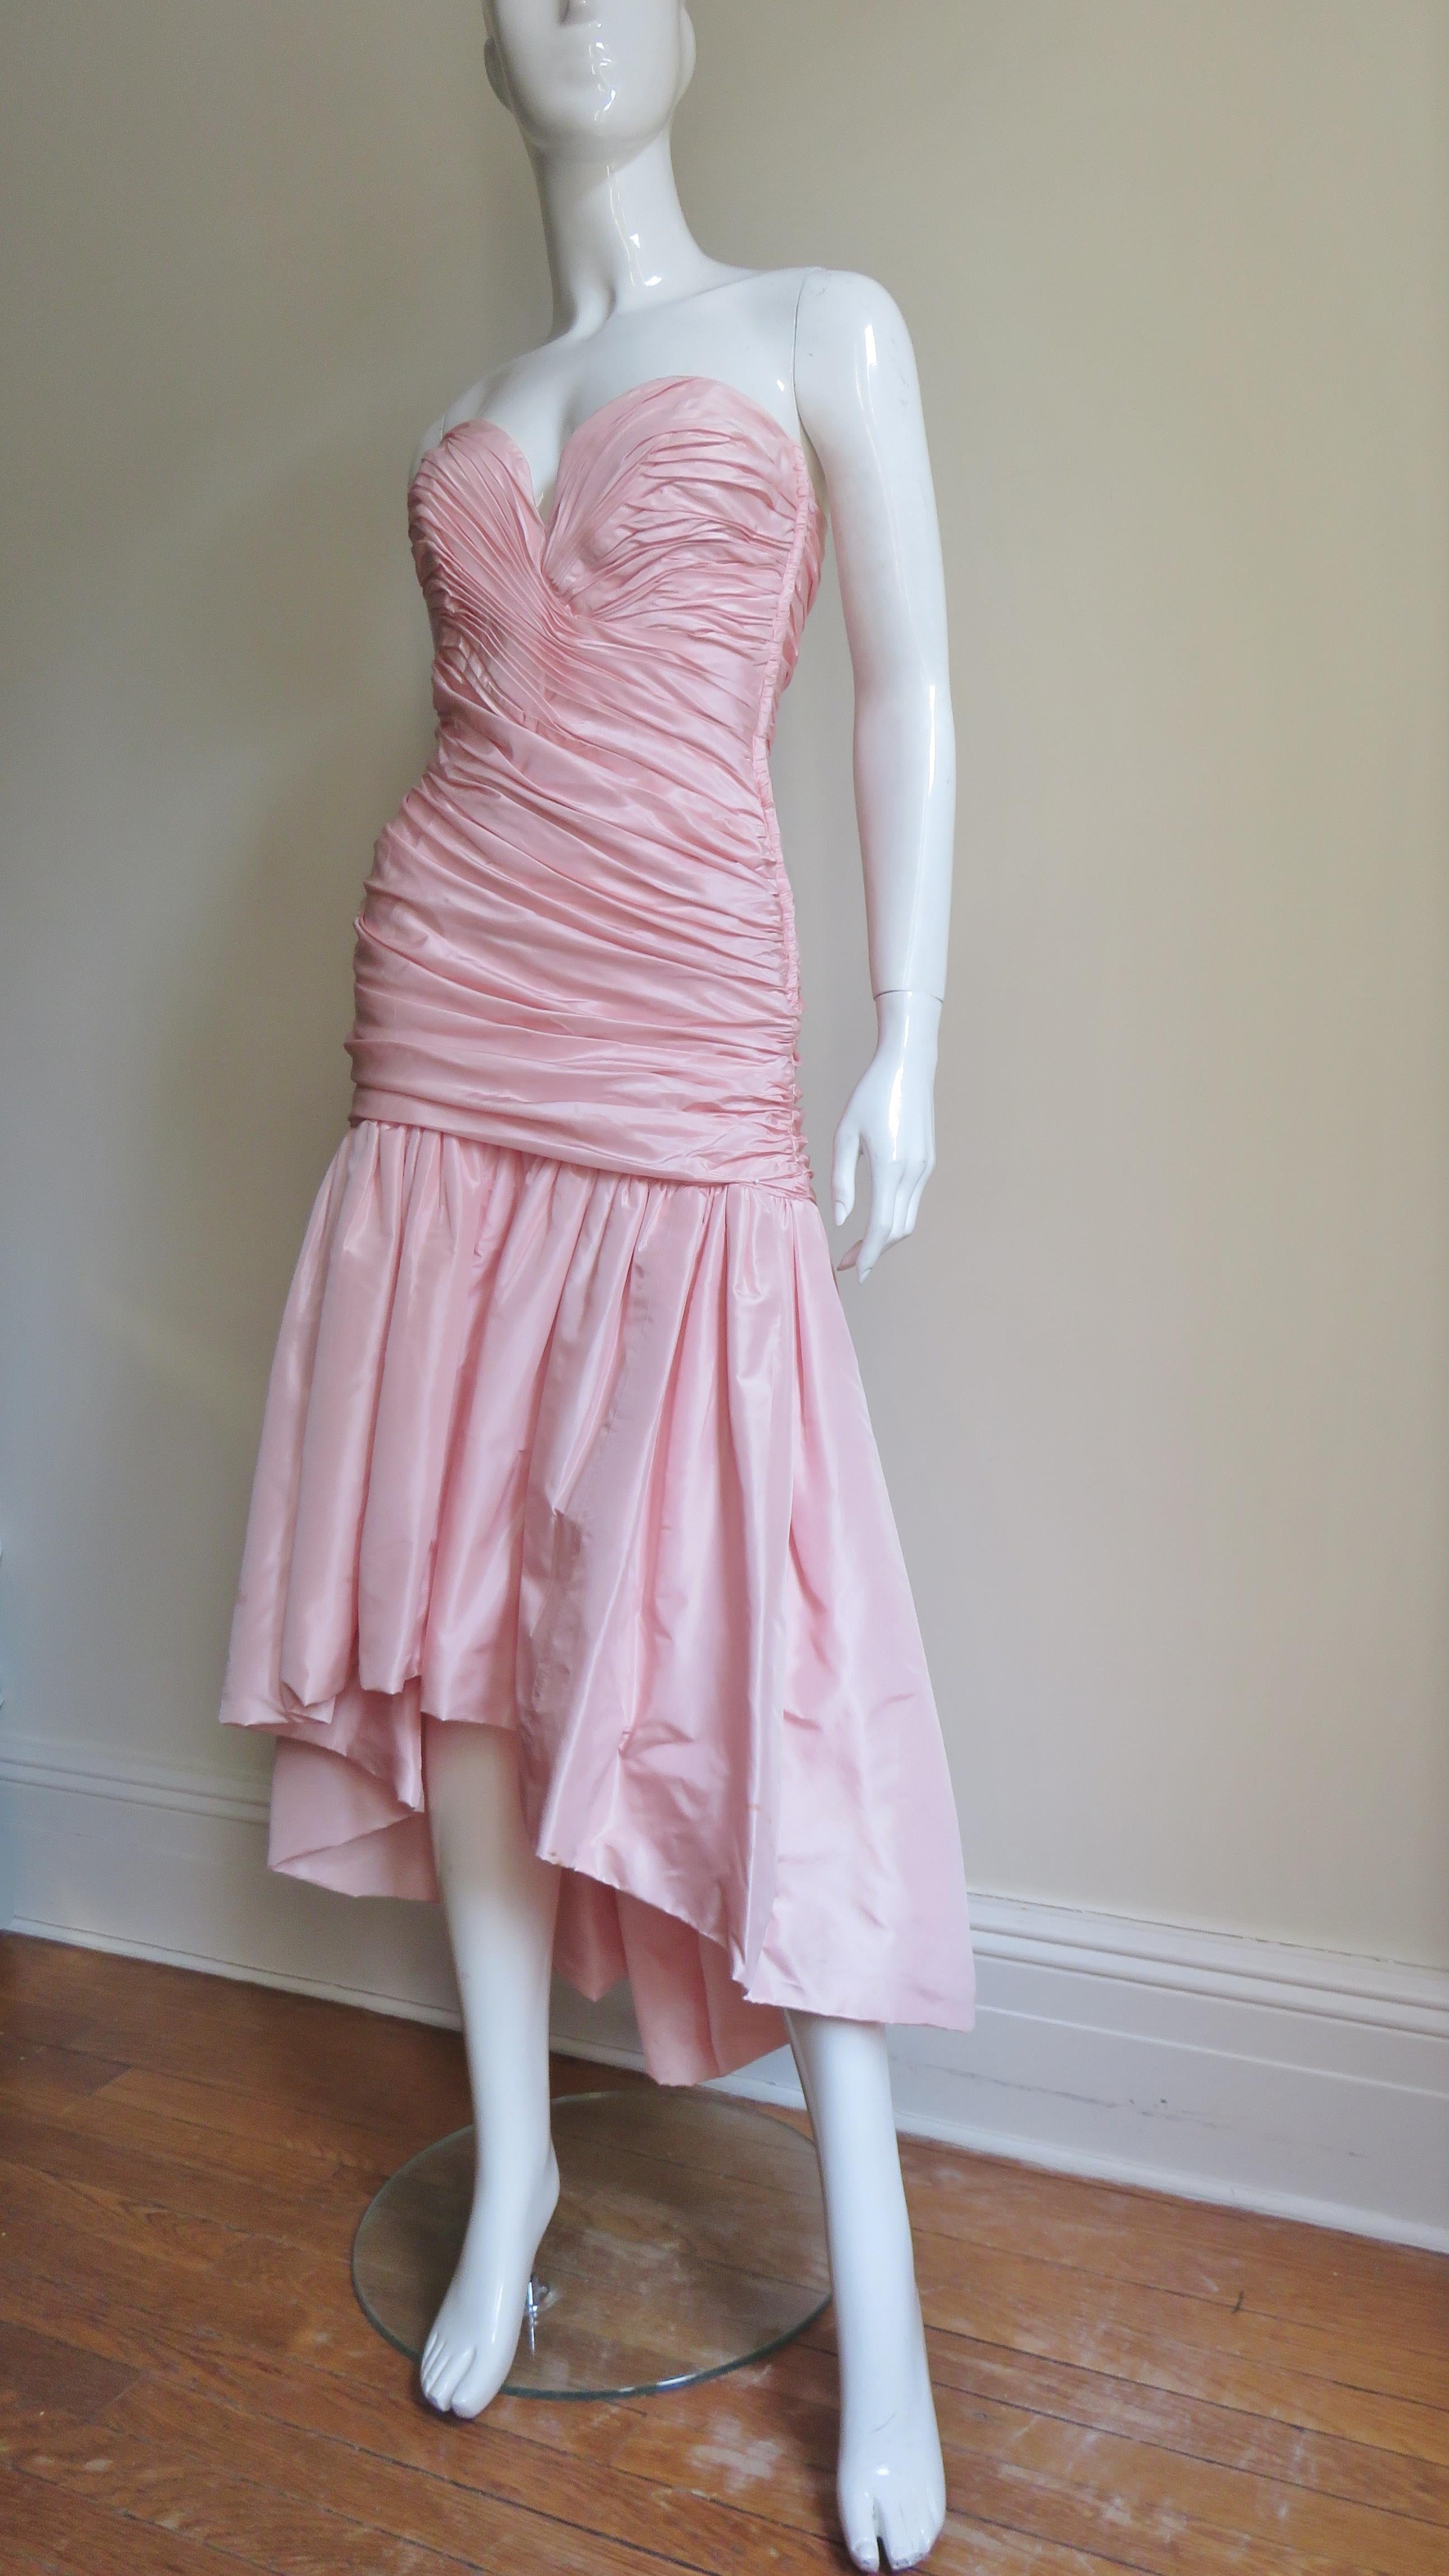 A great pink silk high low dress from Vicky Tiel. It has a drop waist horizontally ruched boned bustier bodice onto which is gathered a full skirt knee length in the front, ankle length in the back. The dress has a side zipper and is fully lined in